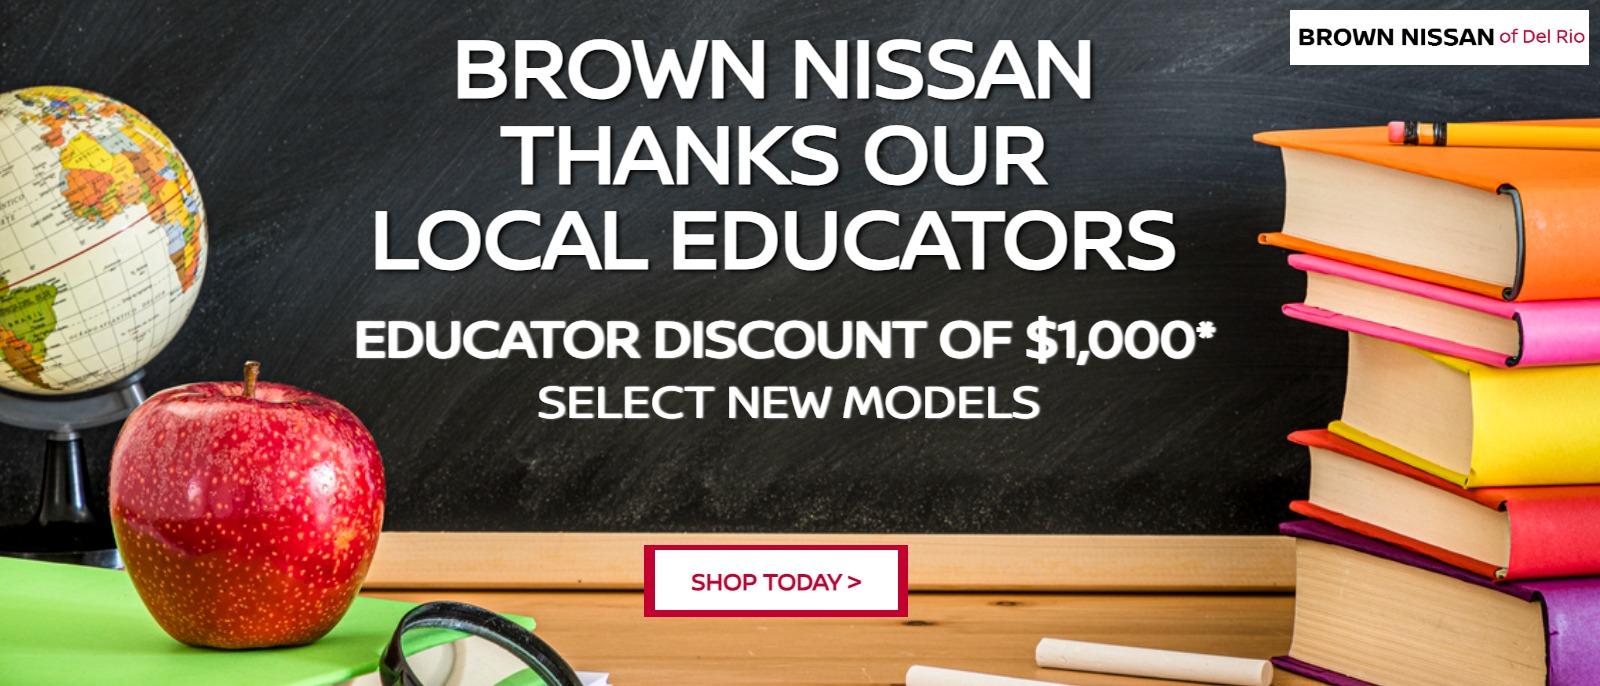 Brown Nissan Thanks Our Local Educators
EDUCATOR DISCOUNT OF $1,000*
Select new models
Shop Today >